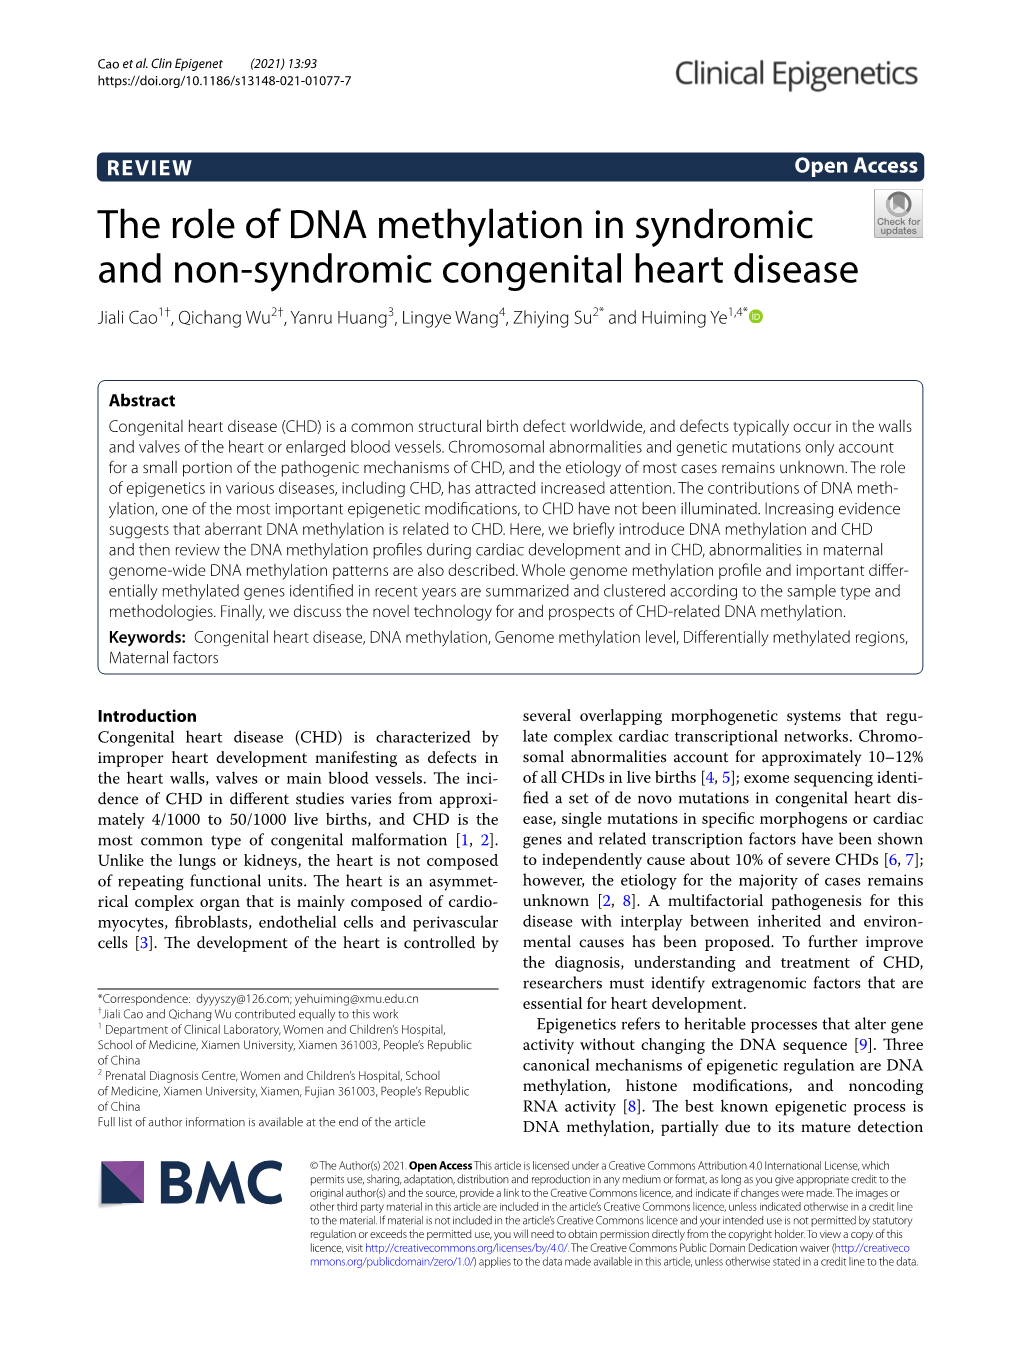 The Role of DNA Methylation in Syndromic and Non-Syndromic Congenital Heart Disease